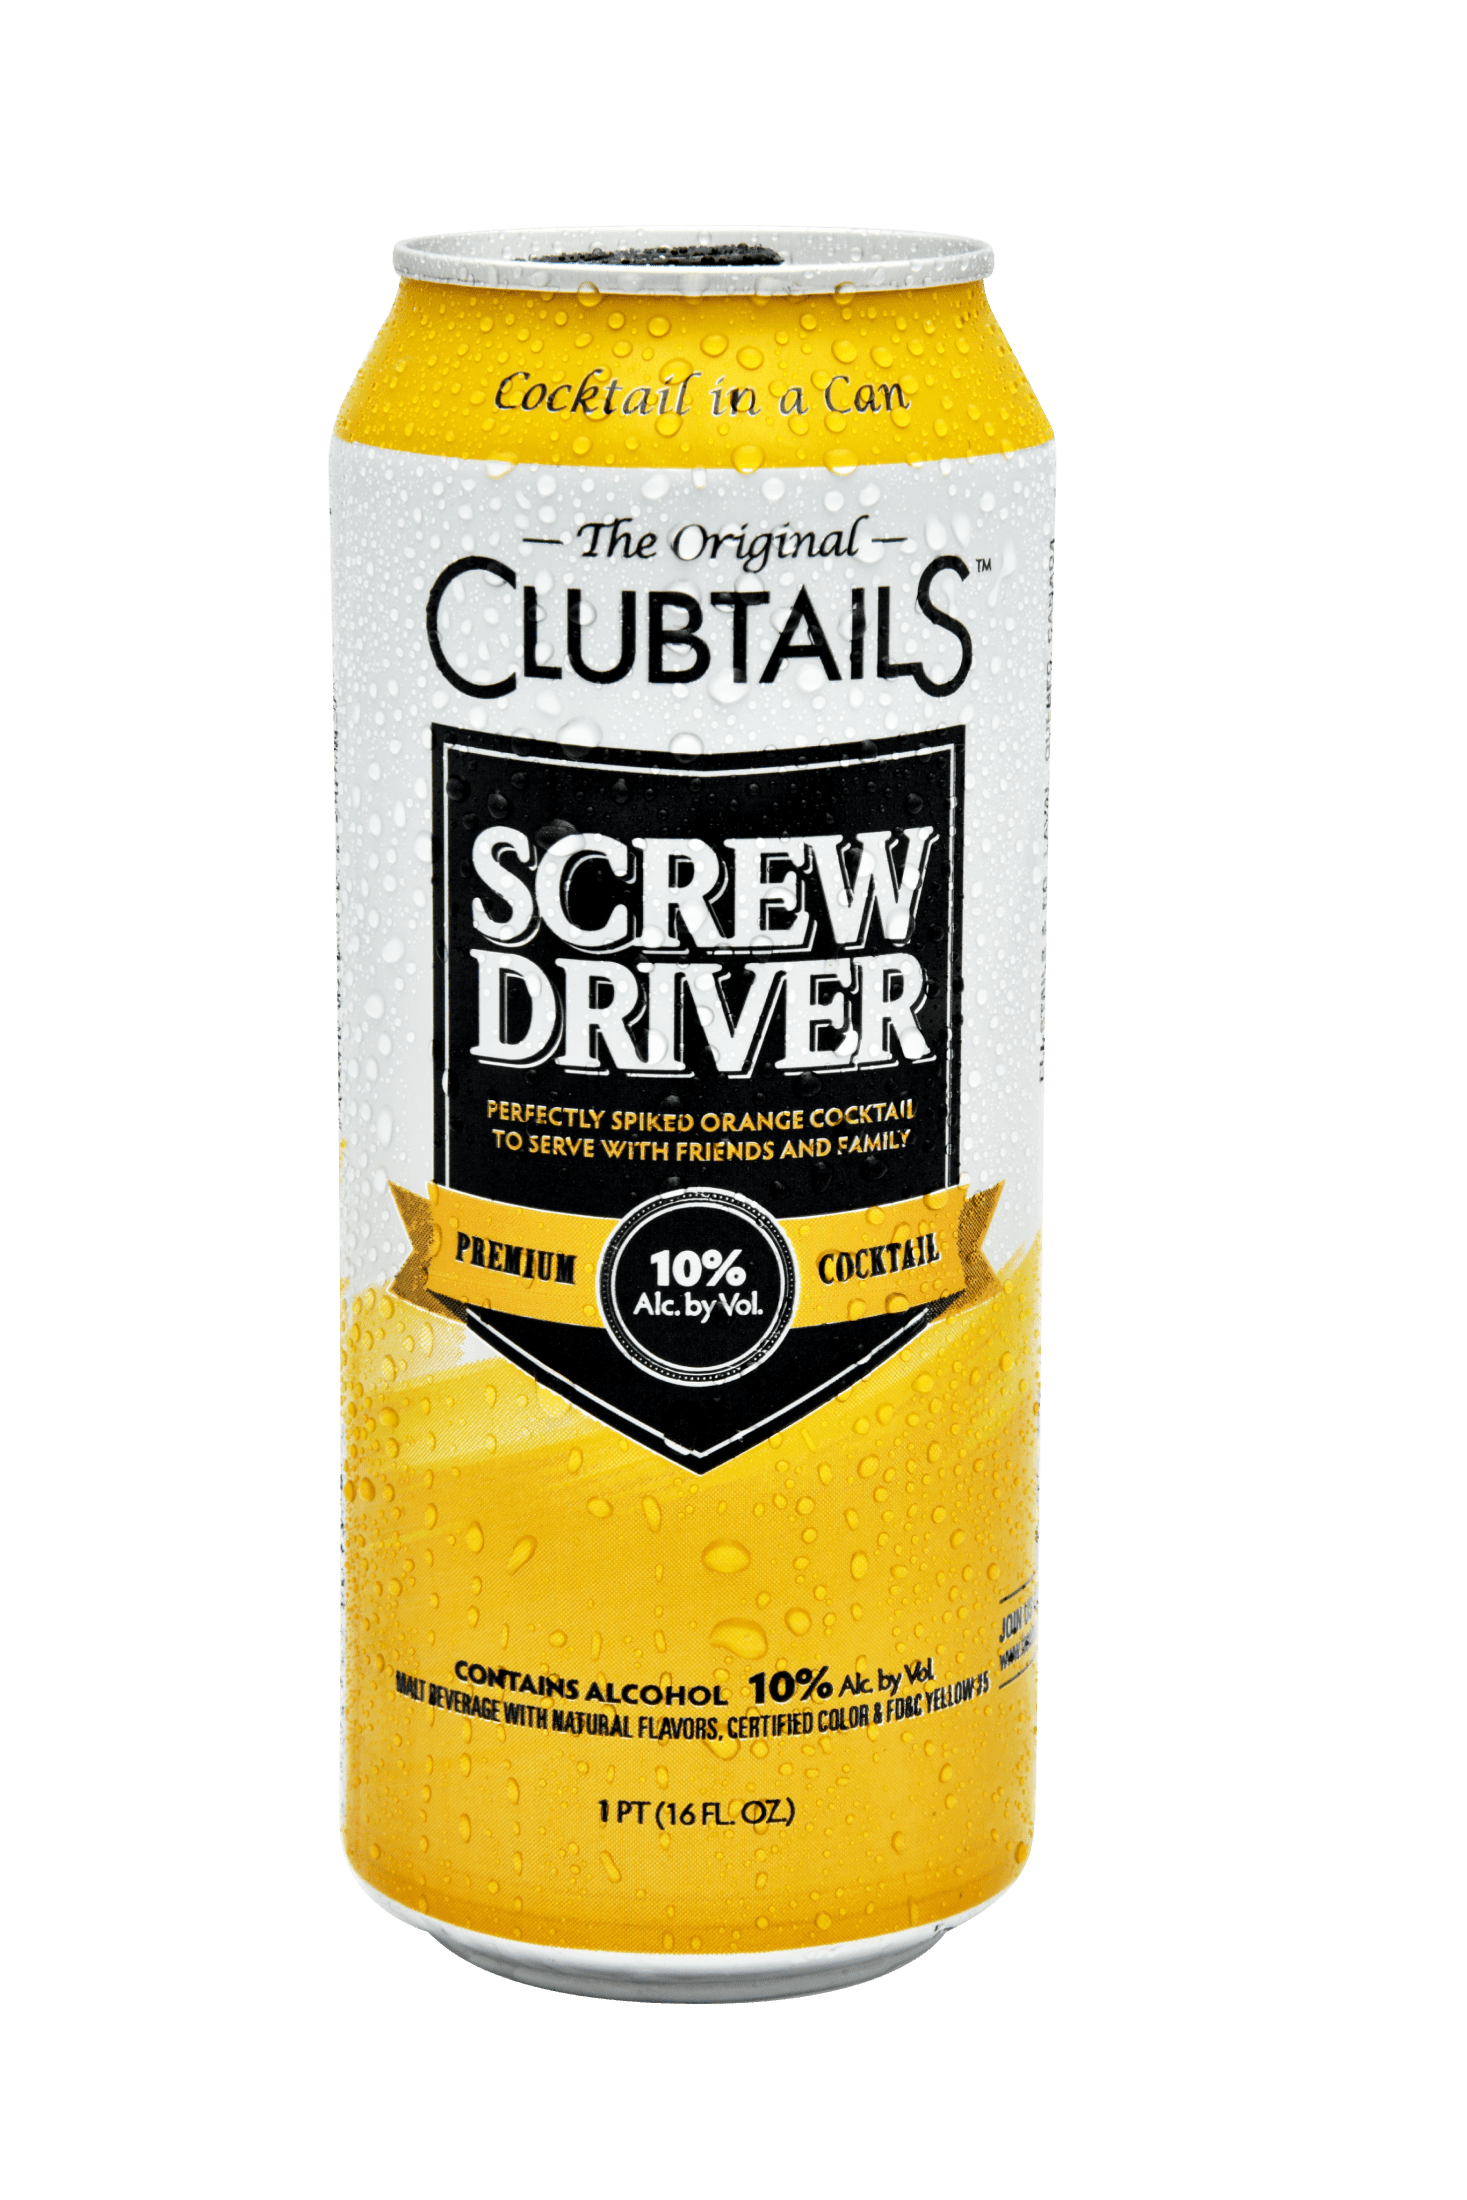 Screwdriver| Clubtails Cocktail in a Can